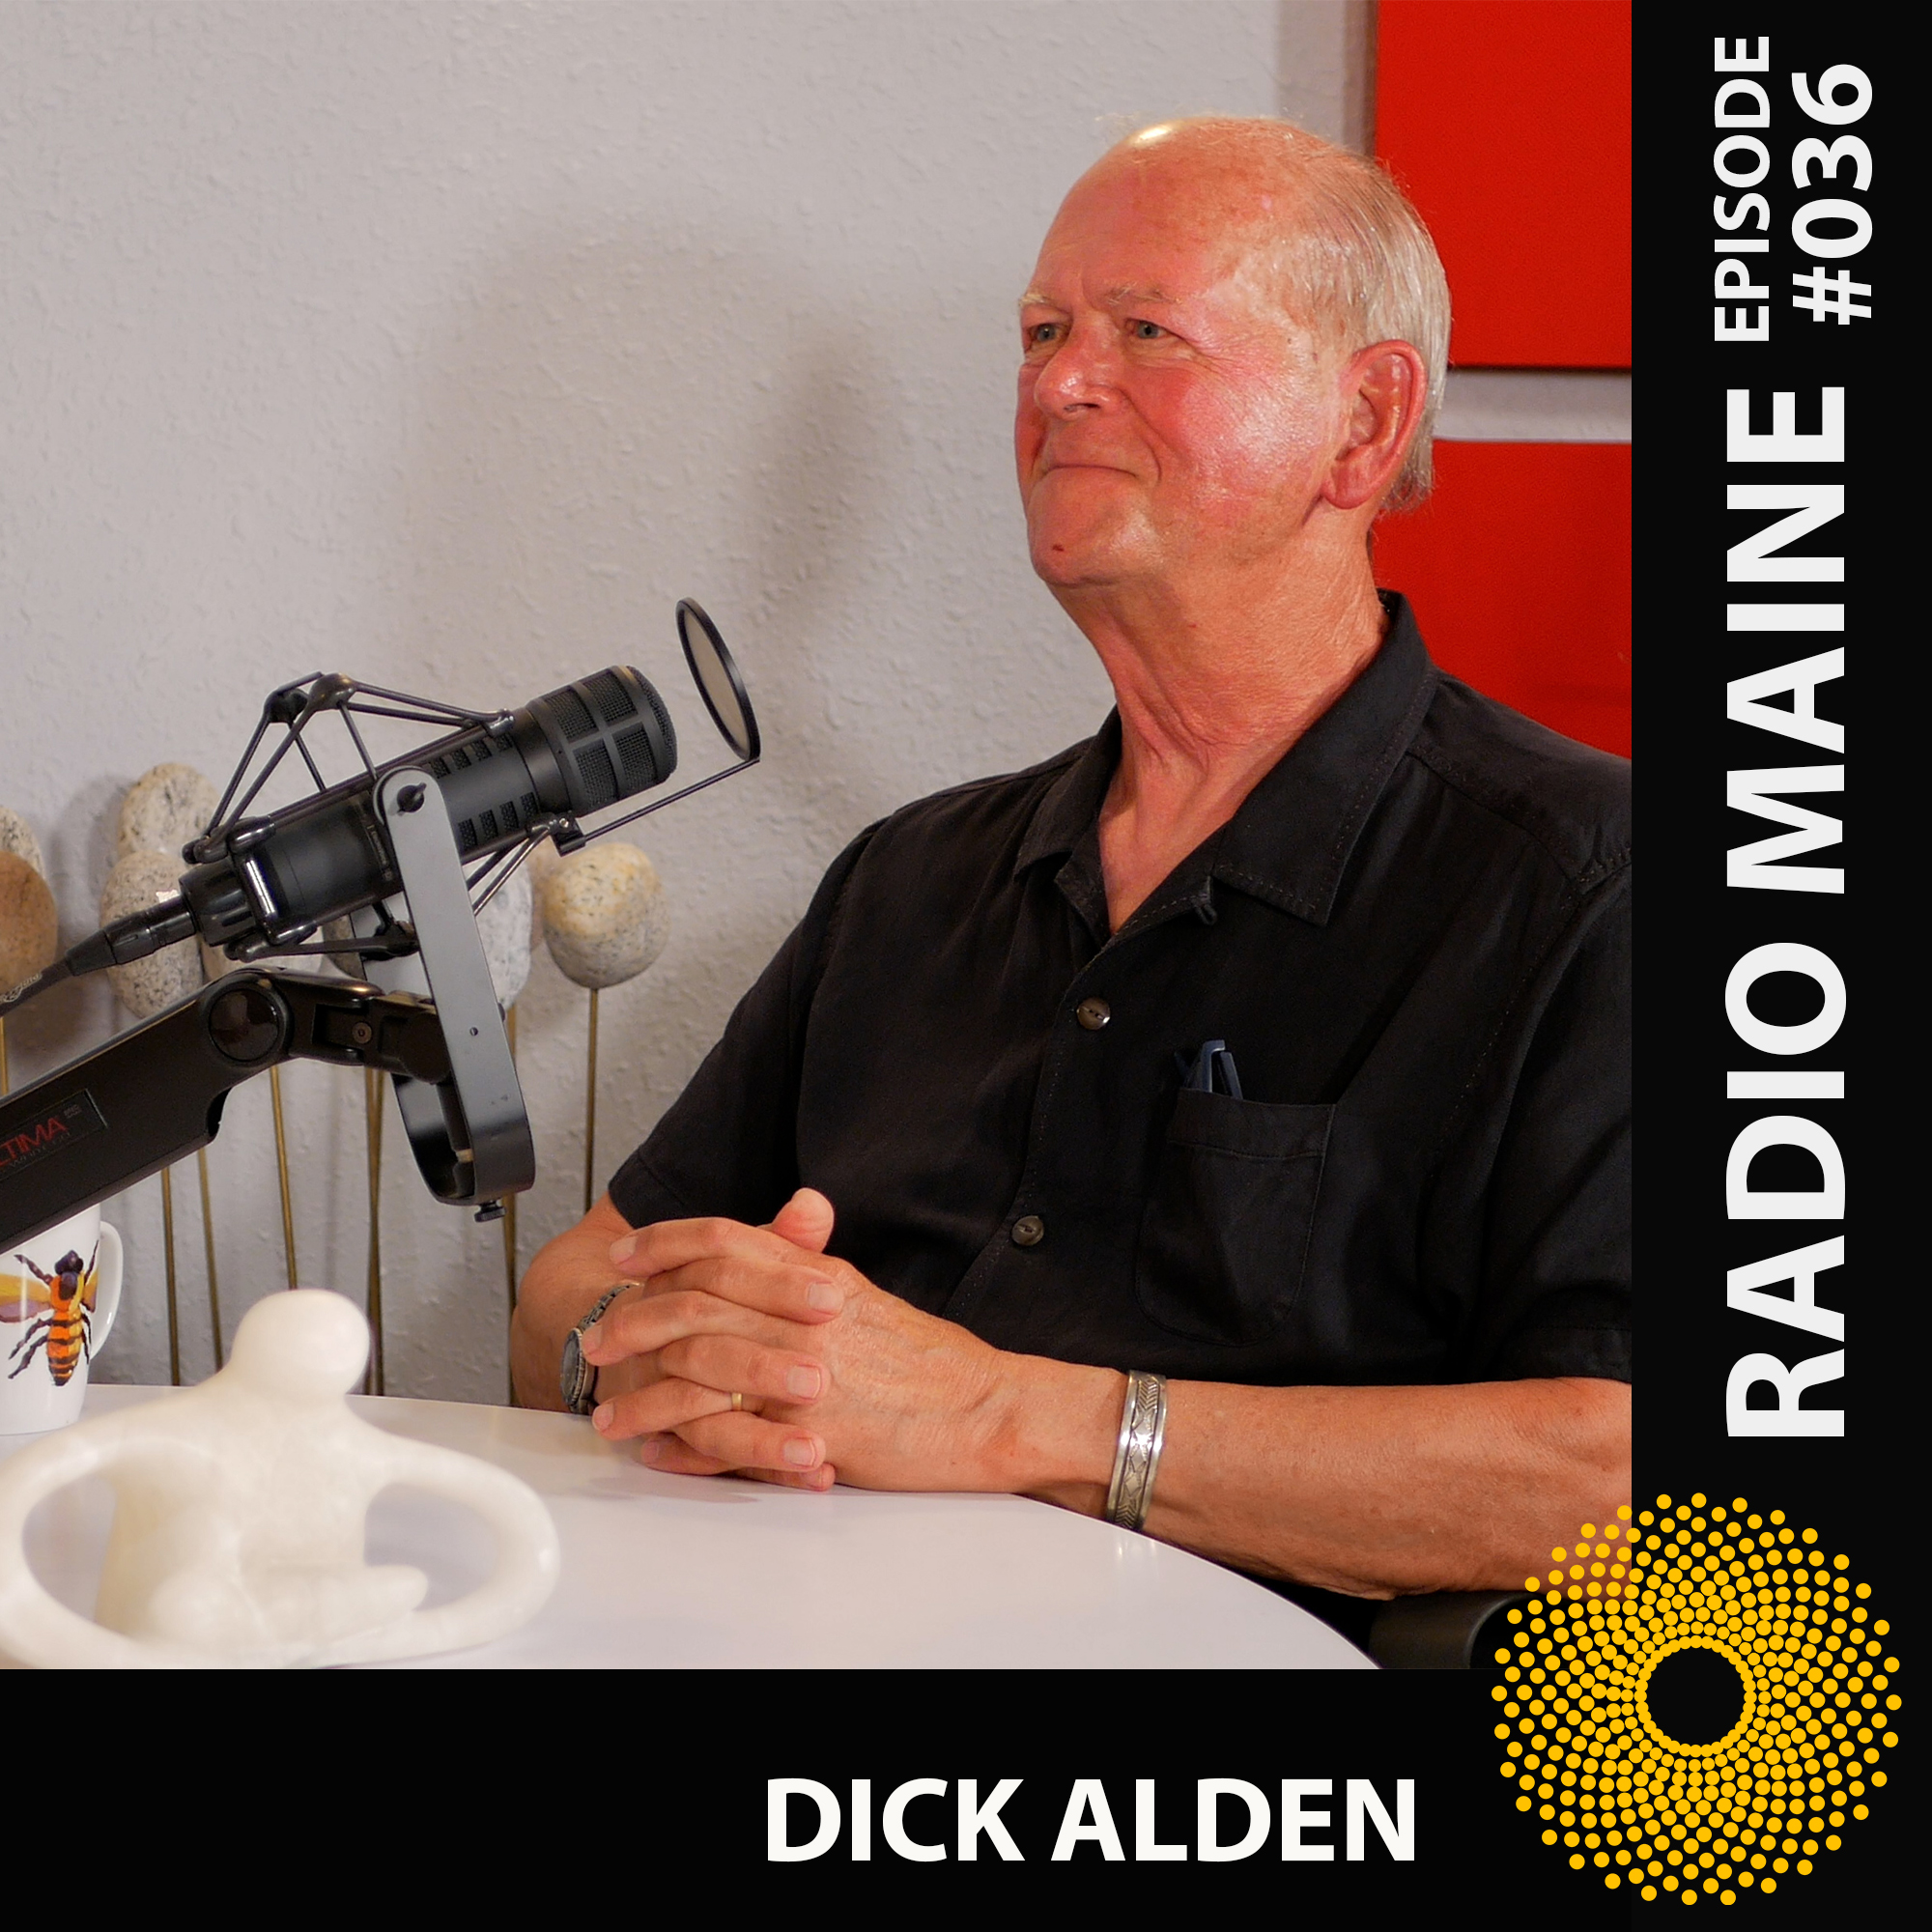 Maine artist and sculptor Dick Alden being interviewed on Radio Maine with Dr. Lisa Belisle